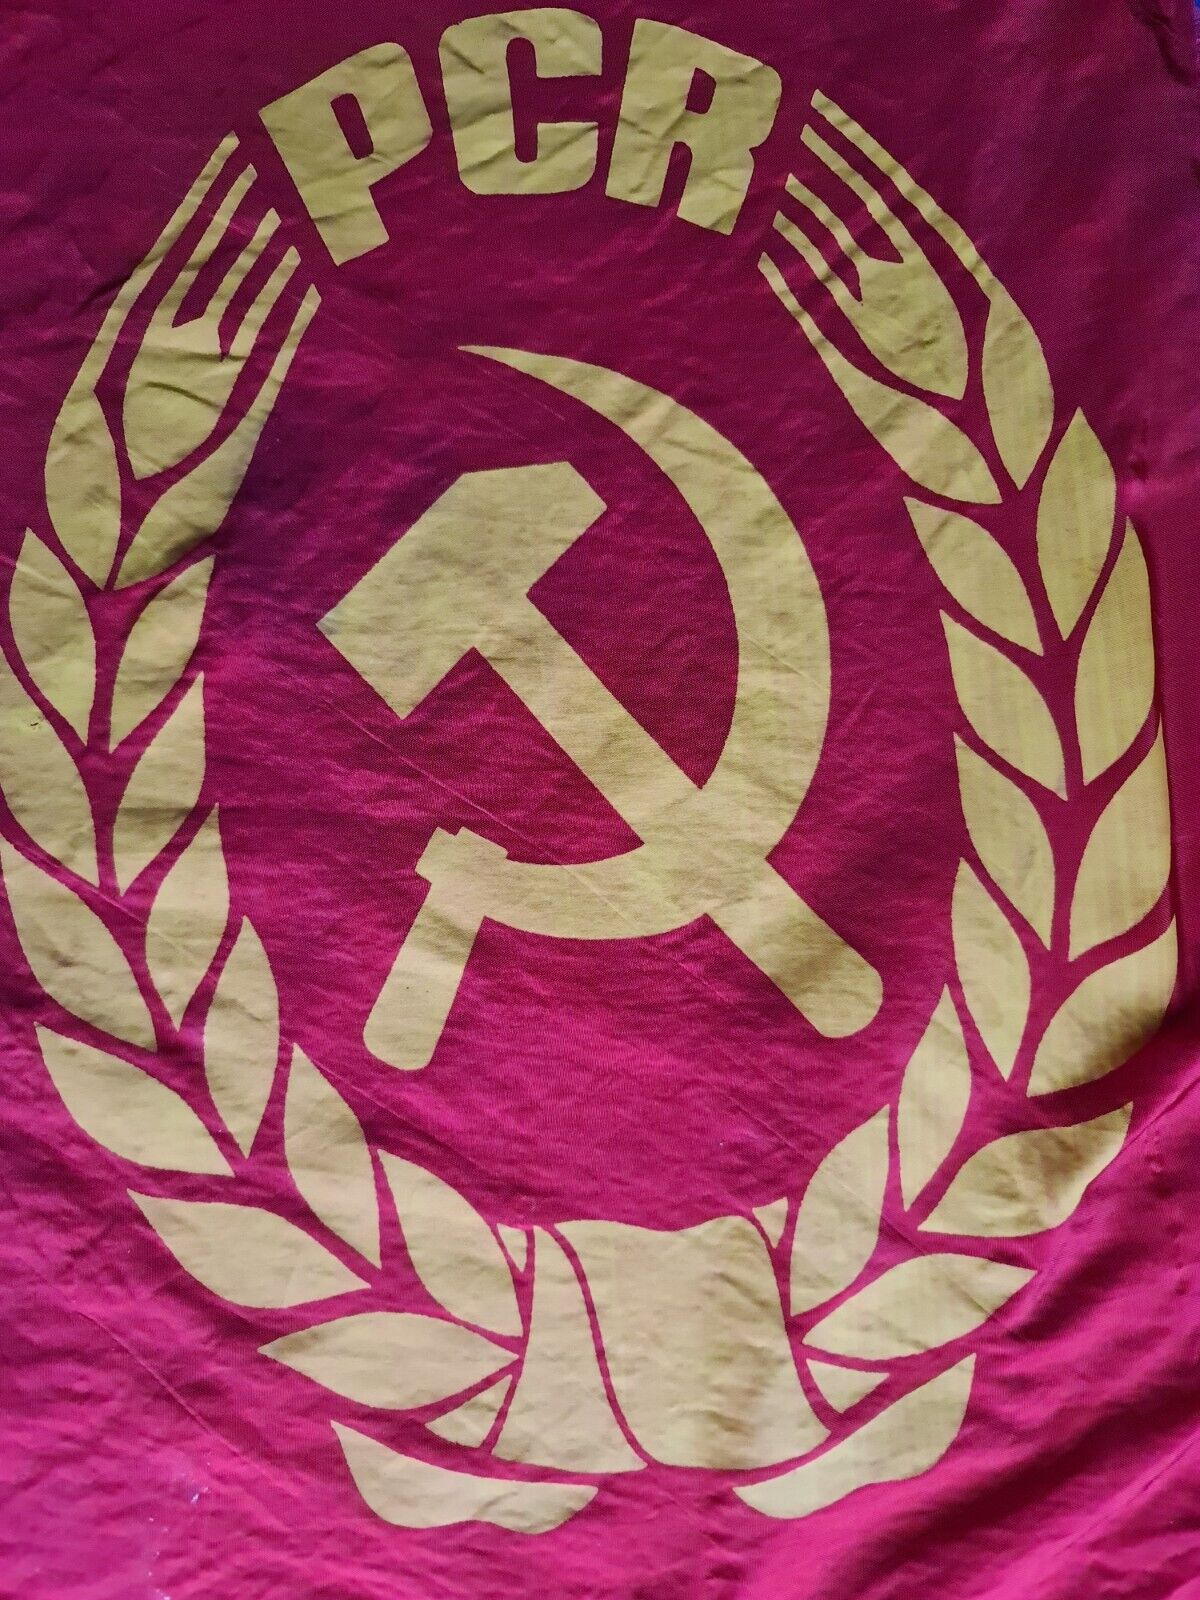 Communist Party Cut Flag Romanian PCR flag Romania Ceausescu hammer and sickle